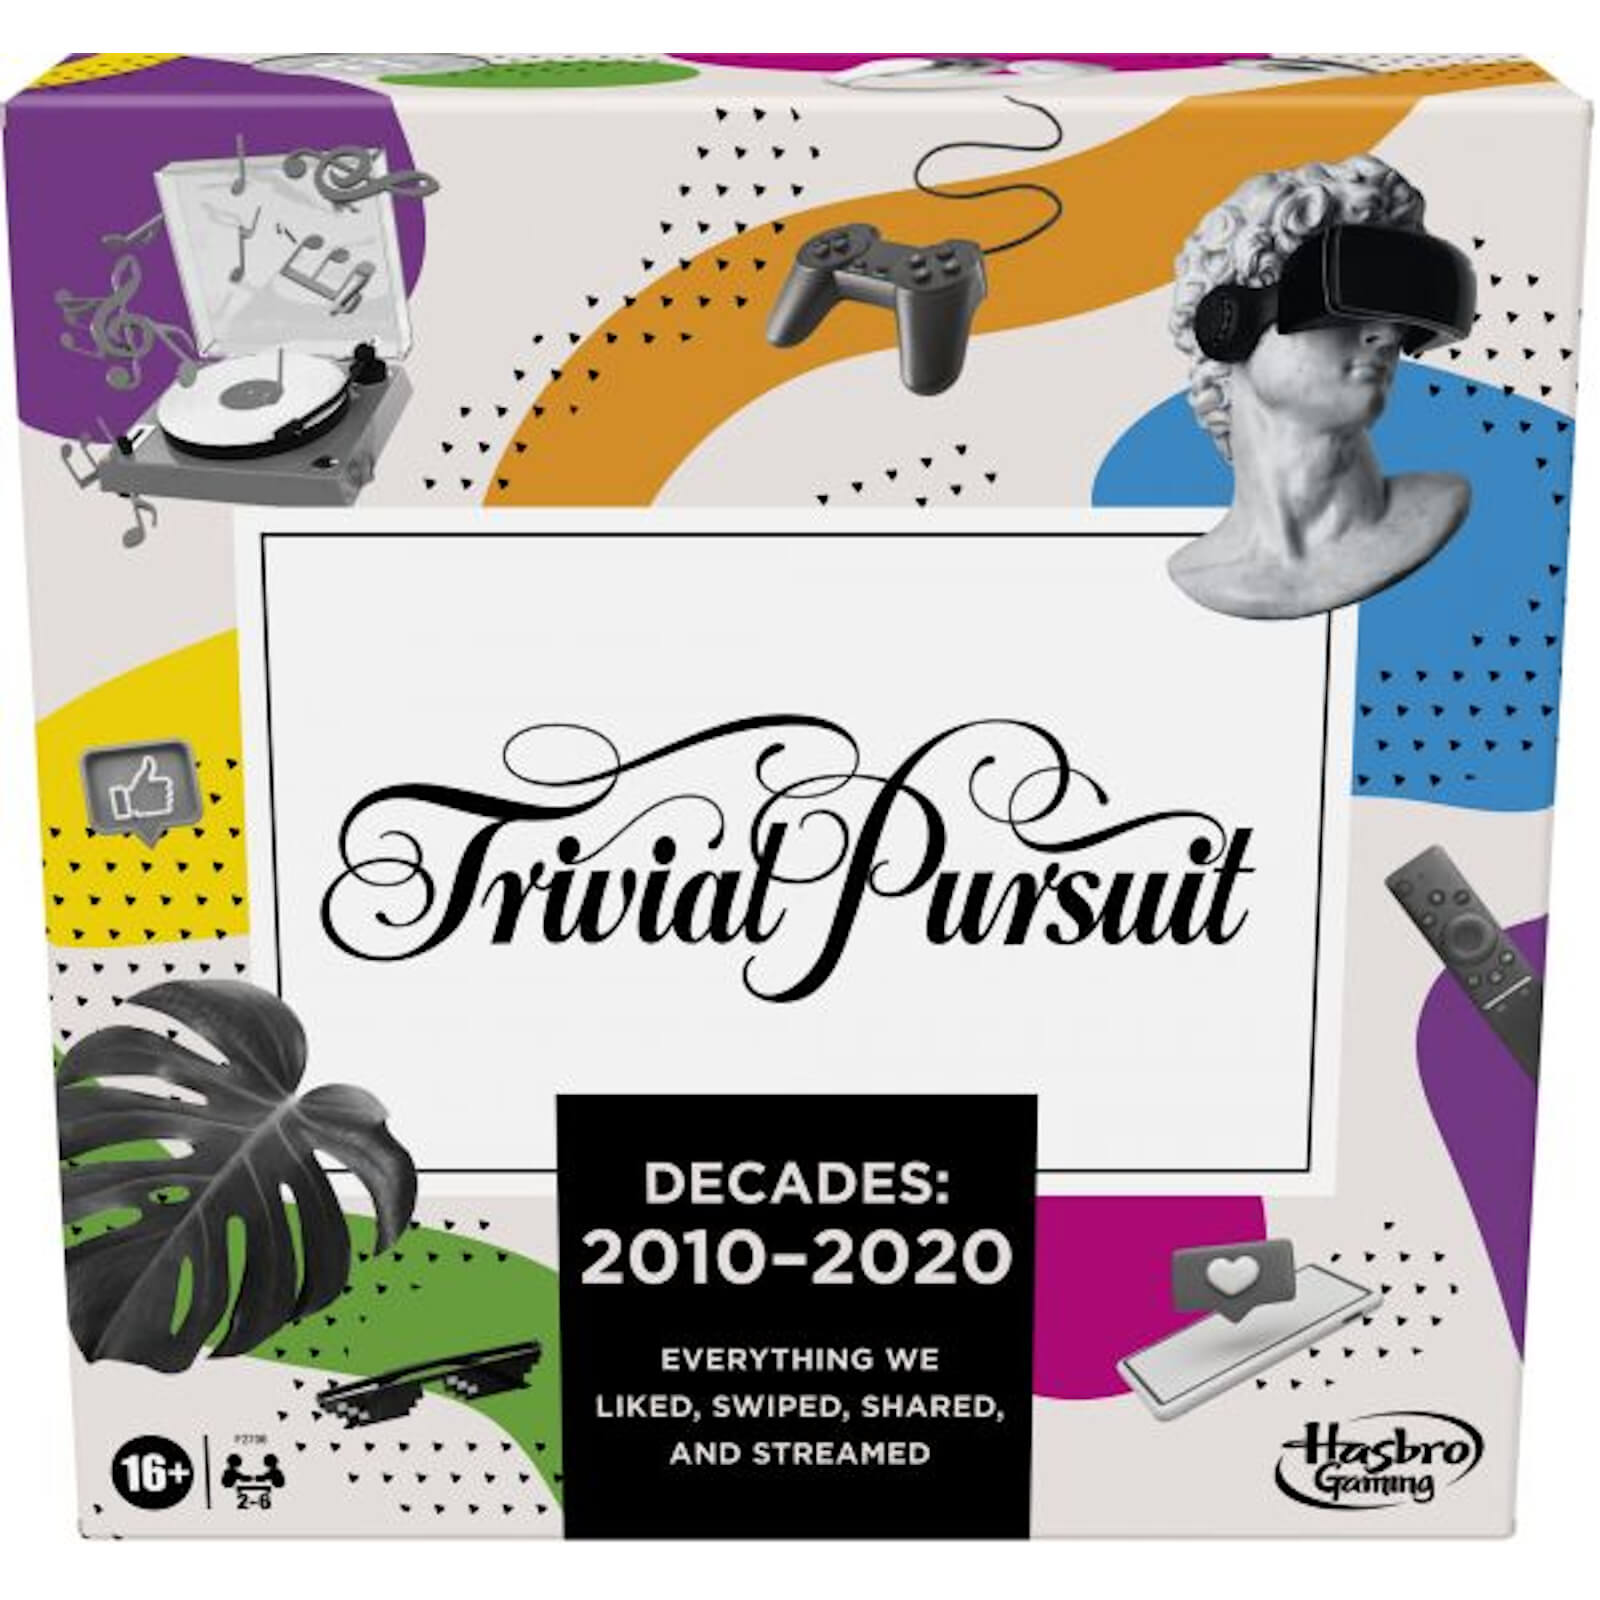 Hasbro Trivial pursuit game - decade 2010 to 2020 edition